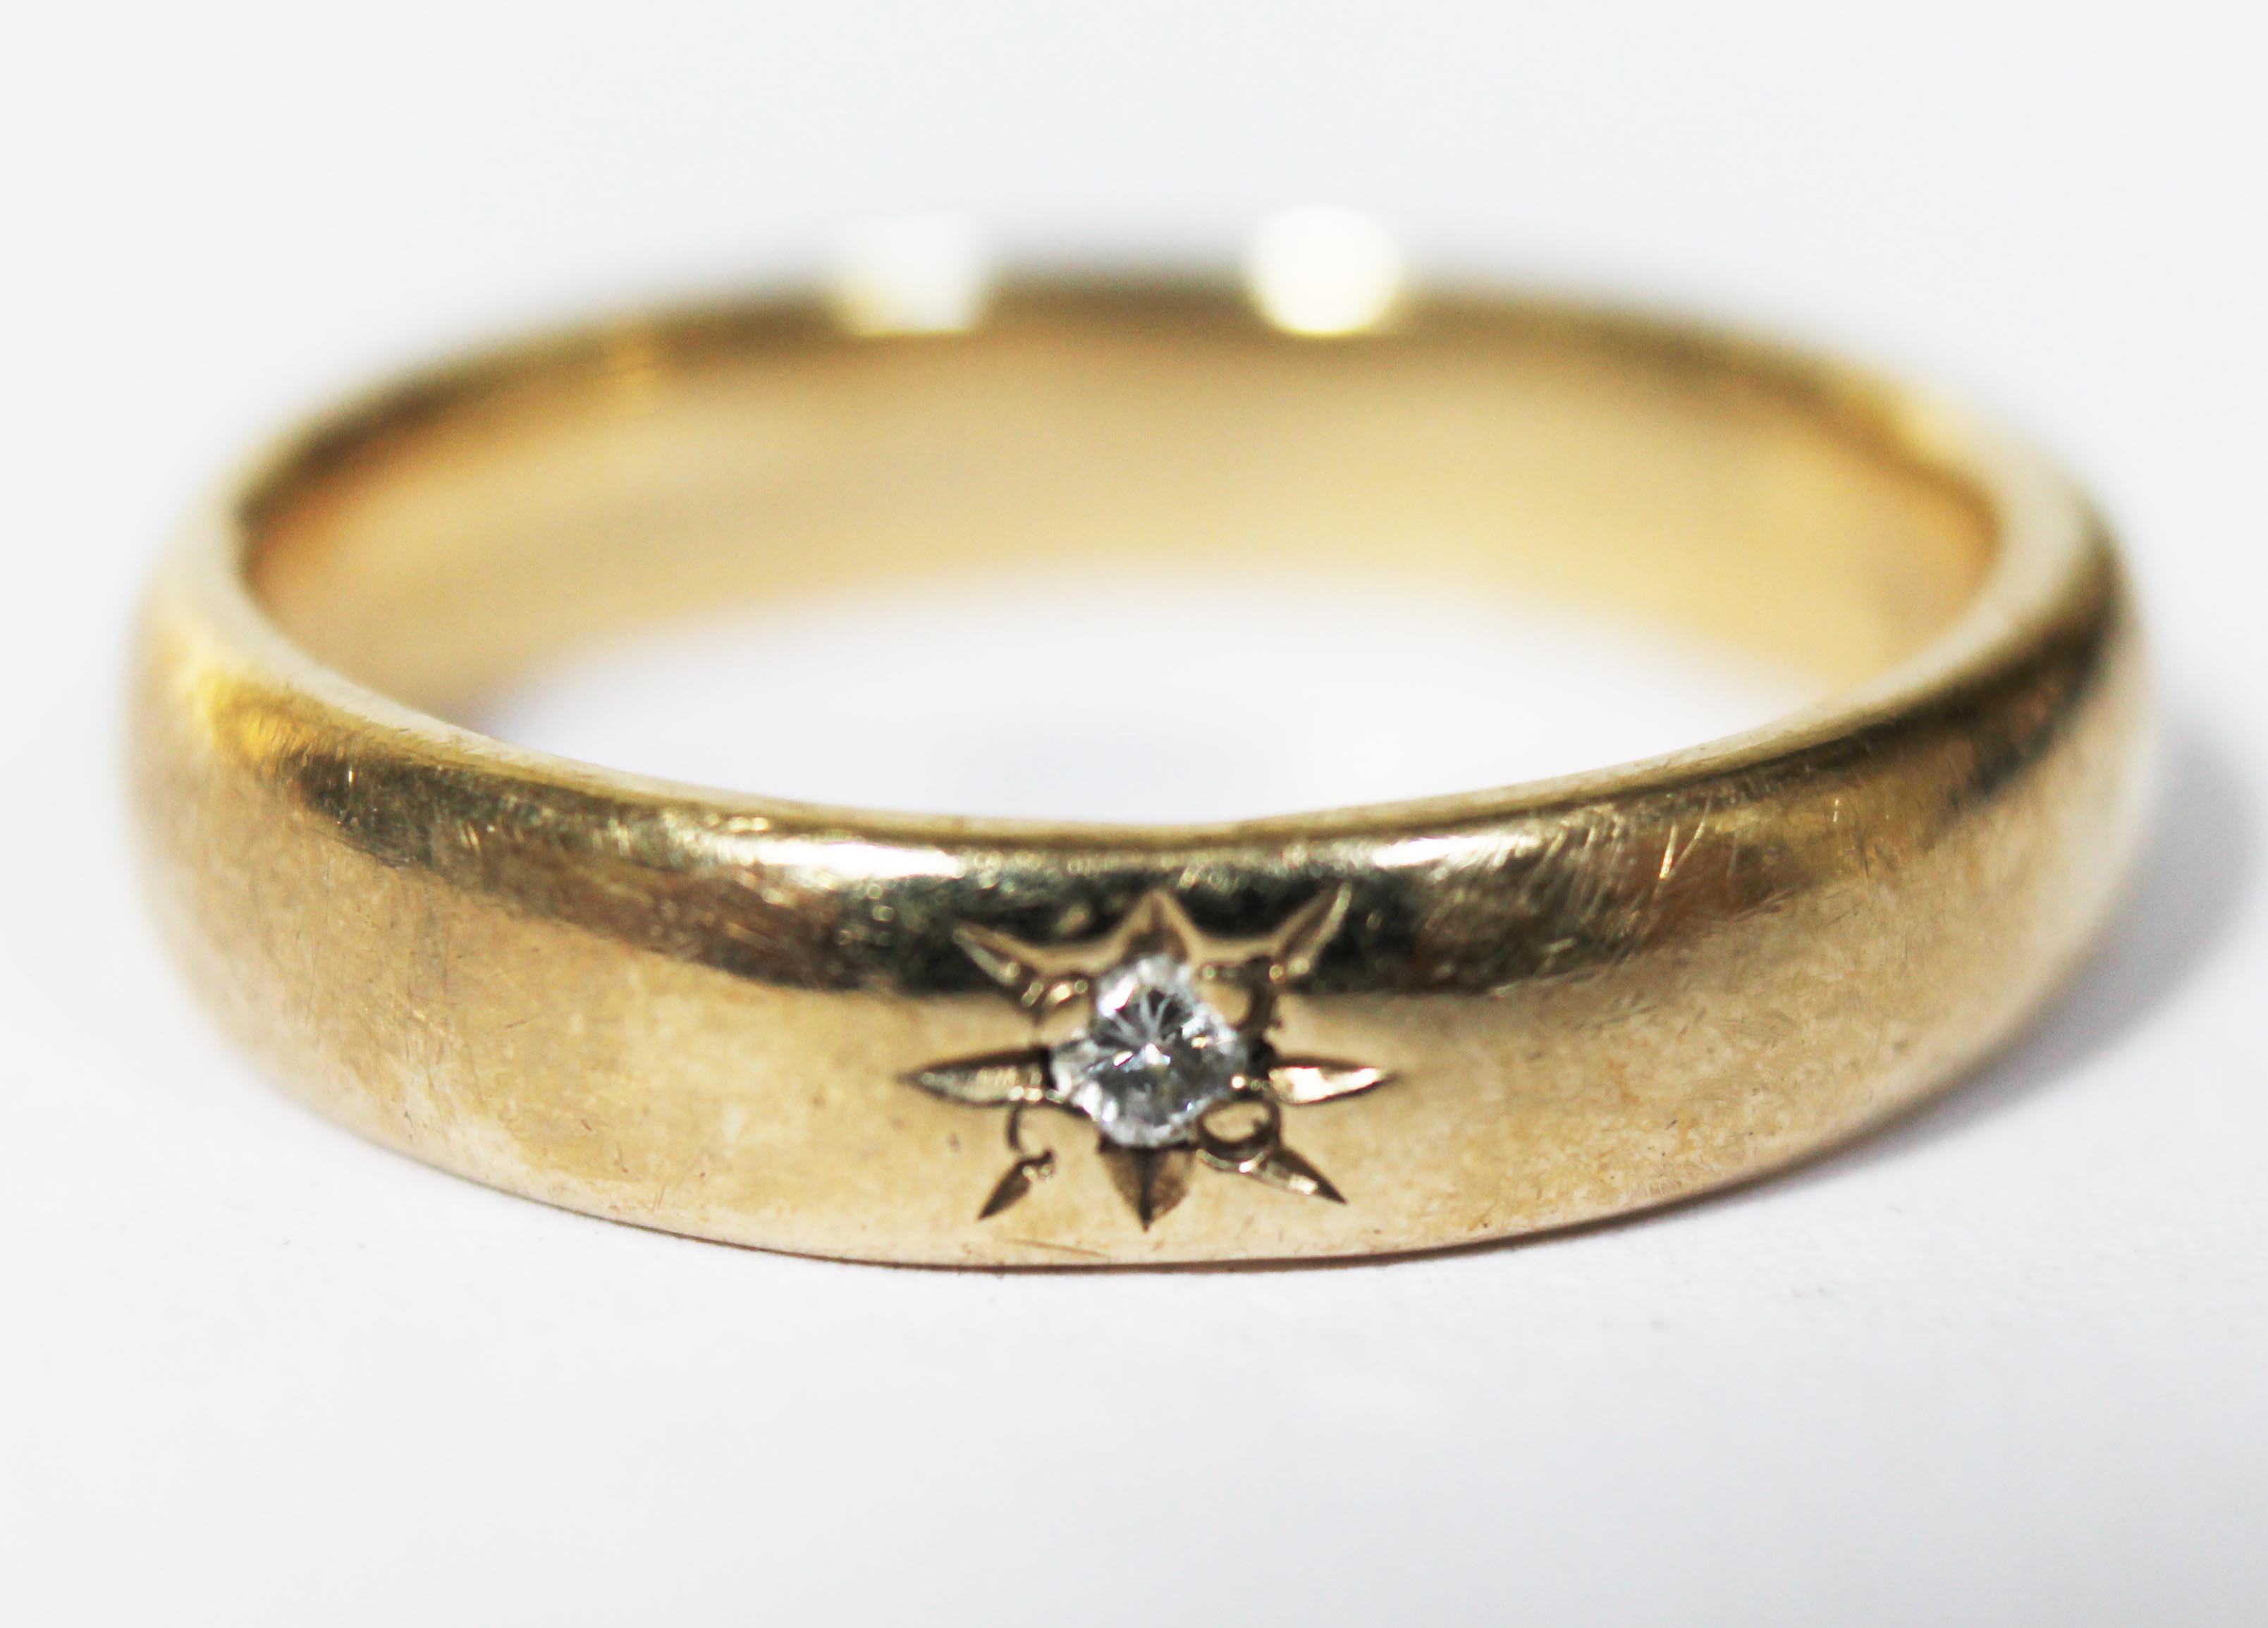 A hallmarked 9ct gold wedding band set with a diamond, gross wt. 4.4g, size N.